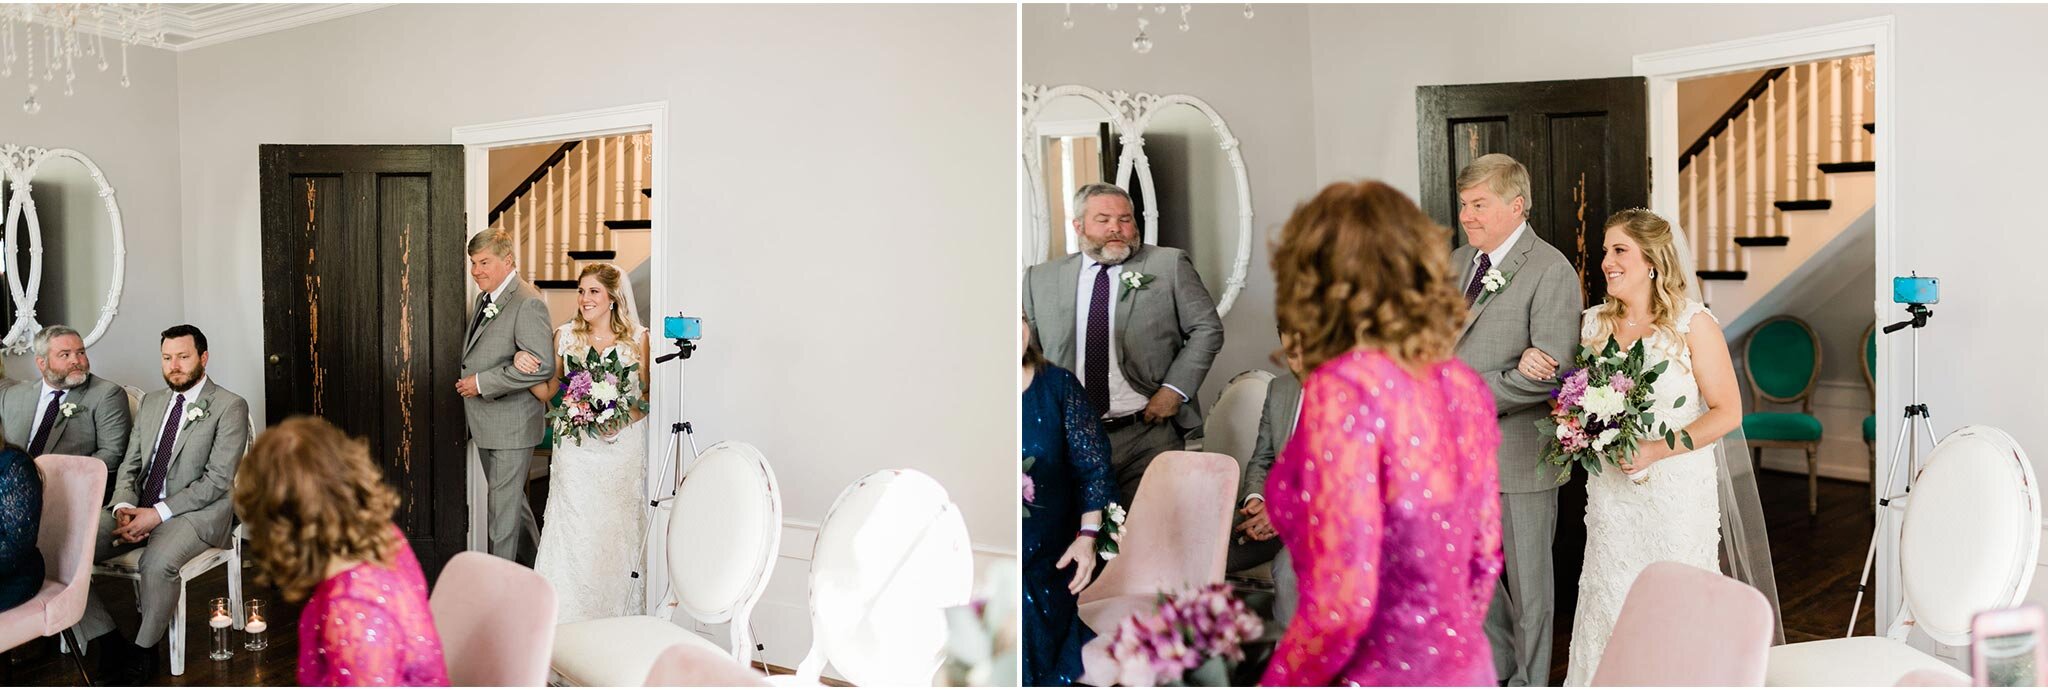 Durham Wedding Photographer | By G. Lin Photography | Bridal entrance with father